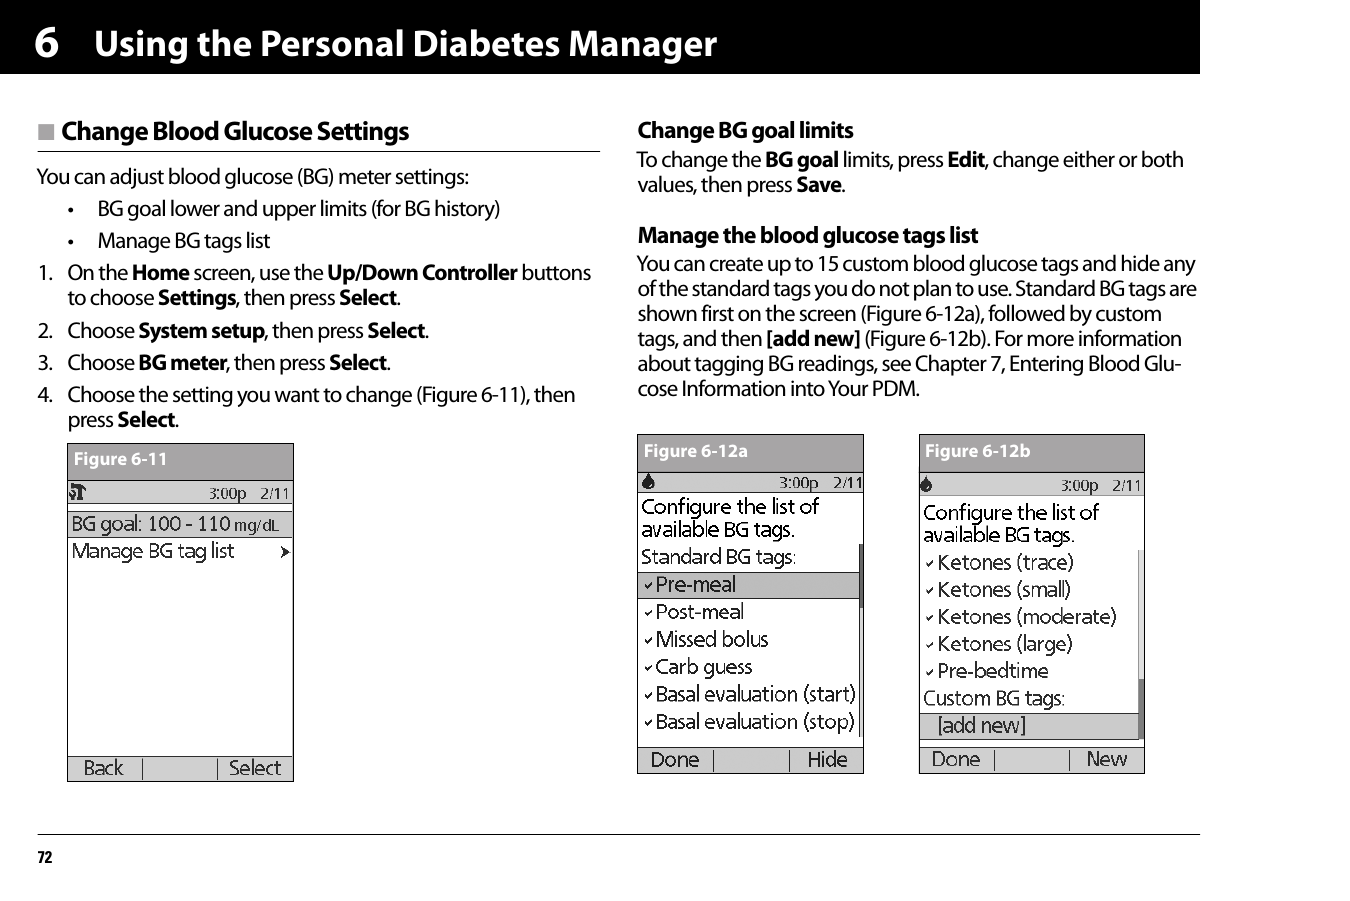 Using the Personal Diabetes Manager726n Change Blood Glucose SettingsYou can adjust blood glucose (BG) meter settings:• BG goal lower and upper limits (for BG history)• Manage BG tags list1. On the Home screen, use the Up/Down Controller buttons to choose Settings, then press Select.2. Choose System setup, then press Select.3. Choose BG meter, then press Select.4. Choose the setting you want to change (Figure 6-11), then press Select.Change BG goal limitsTo change the BG goal limits, press Edit, change either or both values, then press Save.Manage the blood glucose tags listYou can create up to 15 custom blood glucose tags and hide any of the standard tags you do not plan to use. Standard BG tags are shown first on the screen (Figure 6-12a), followed by custom tags, and then [add new] (Figure 6-12b). For more information about tagging BG readings, see Chapter 7, Entering Blood Glu-cose Information into Your PDM.Figure 6-11 Figure 6-12a Figure 6-12b